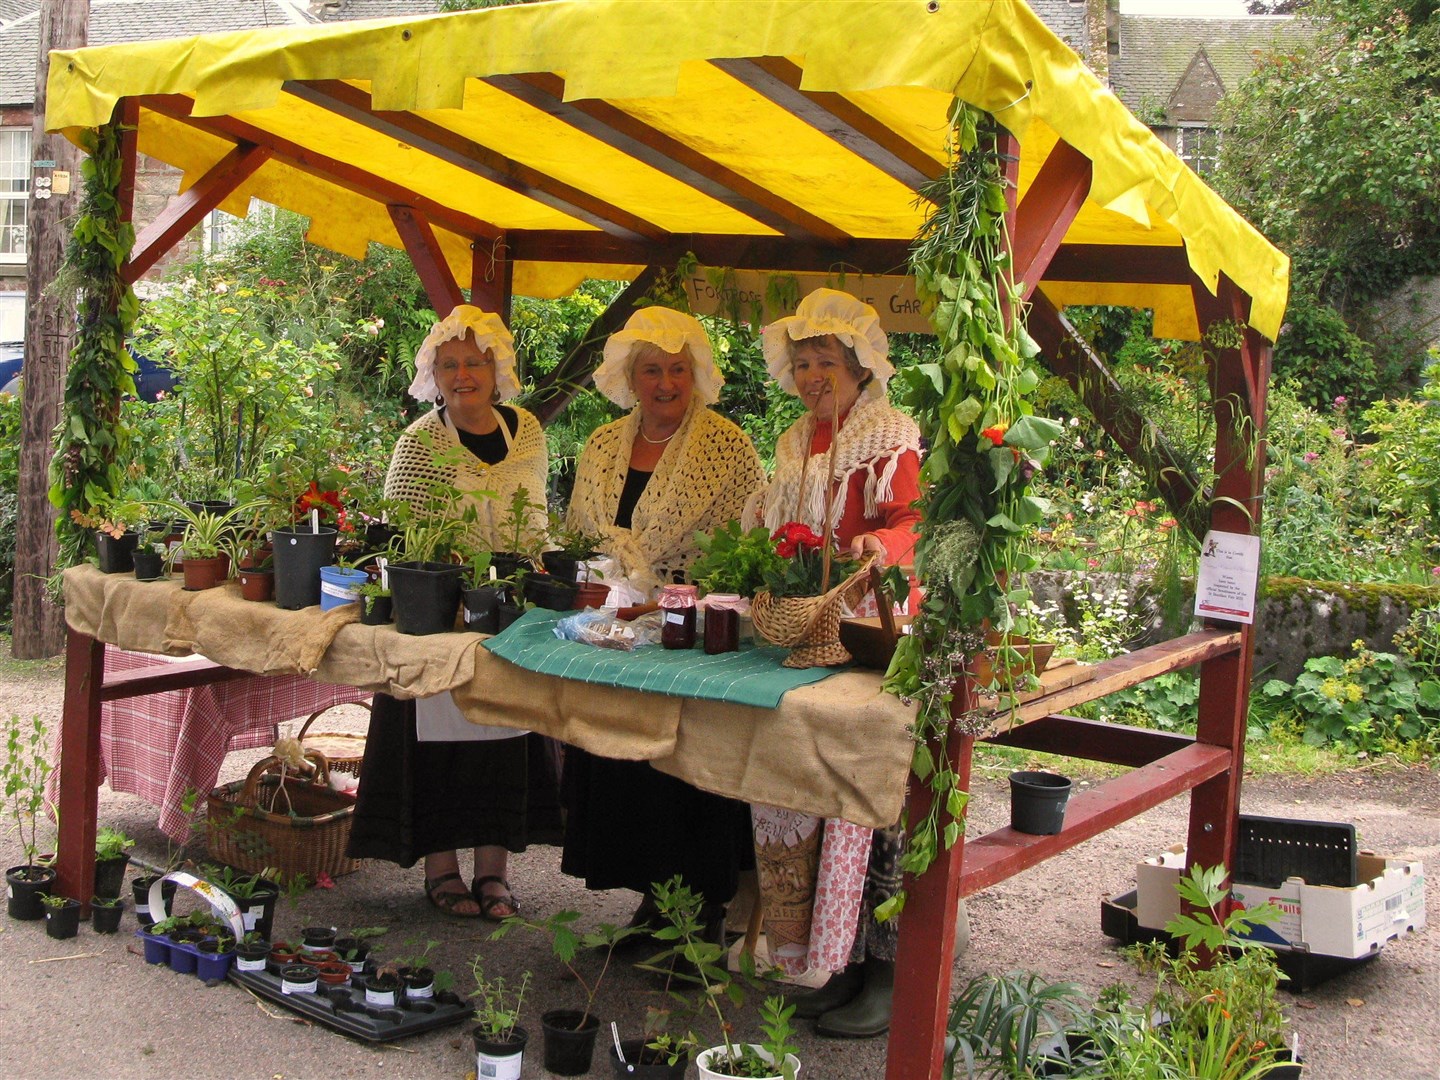 Stallholders in period costume bring colour to the event and mark its historical significance.